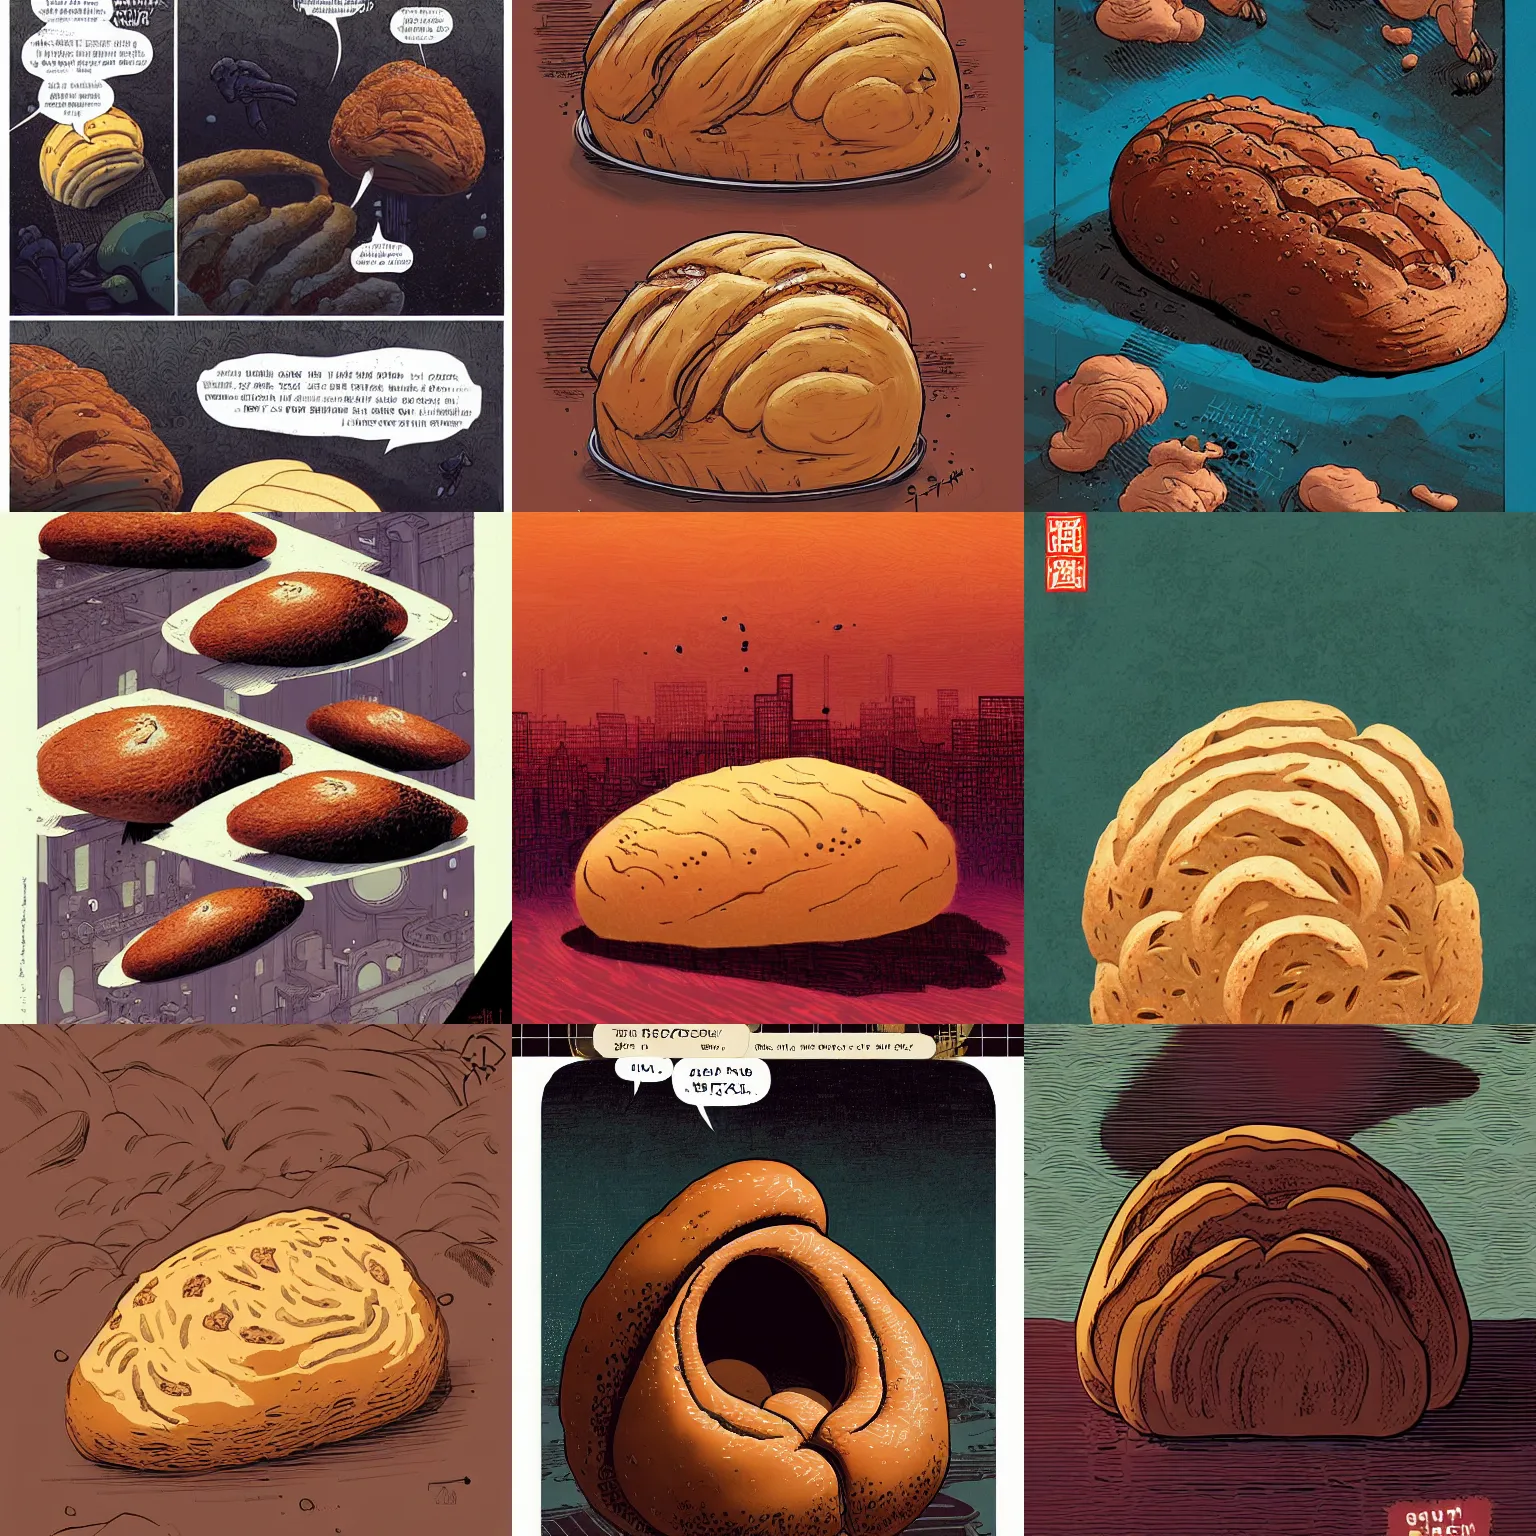 Prompt: bread that looks like a turd, by feng zhu, loish, laurie greasley, victo ngai, andreas rocha, john harris